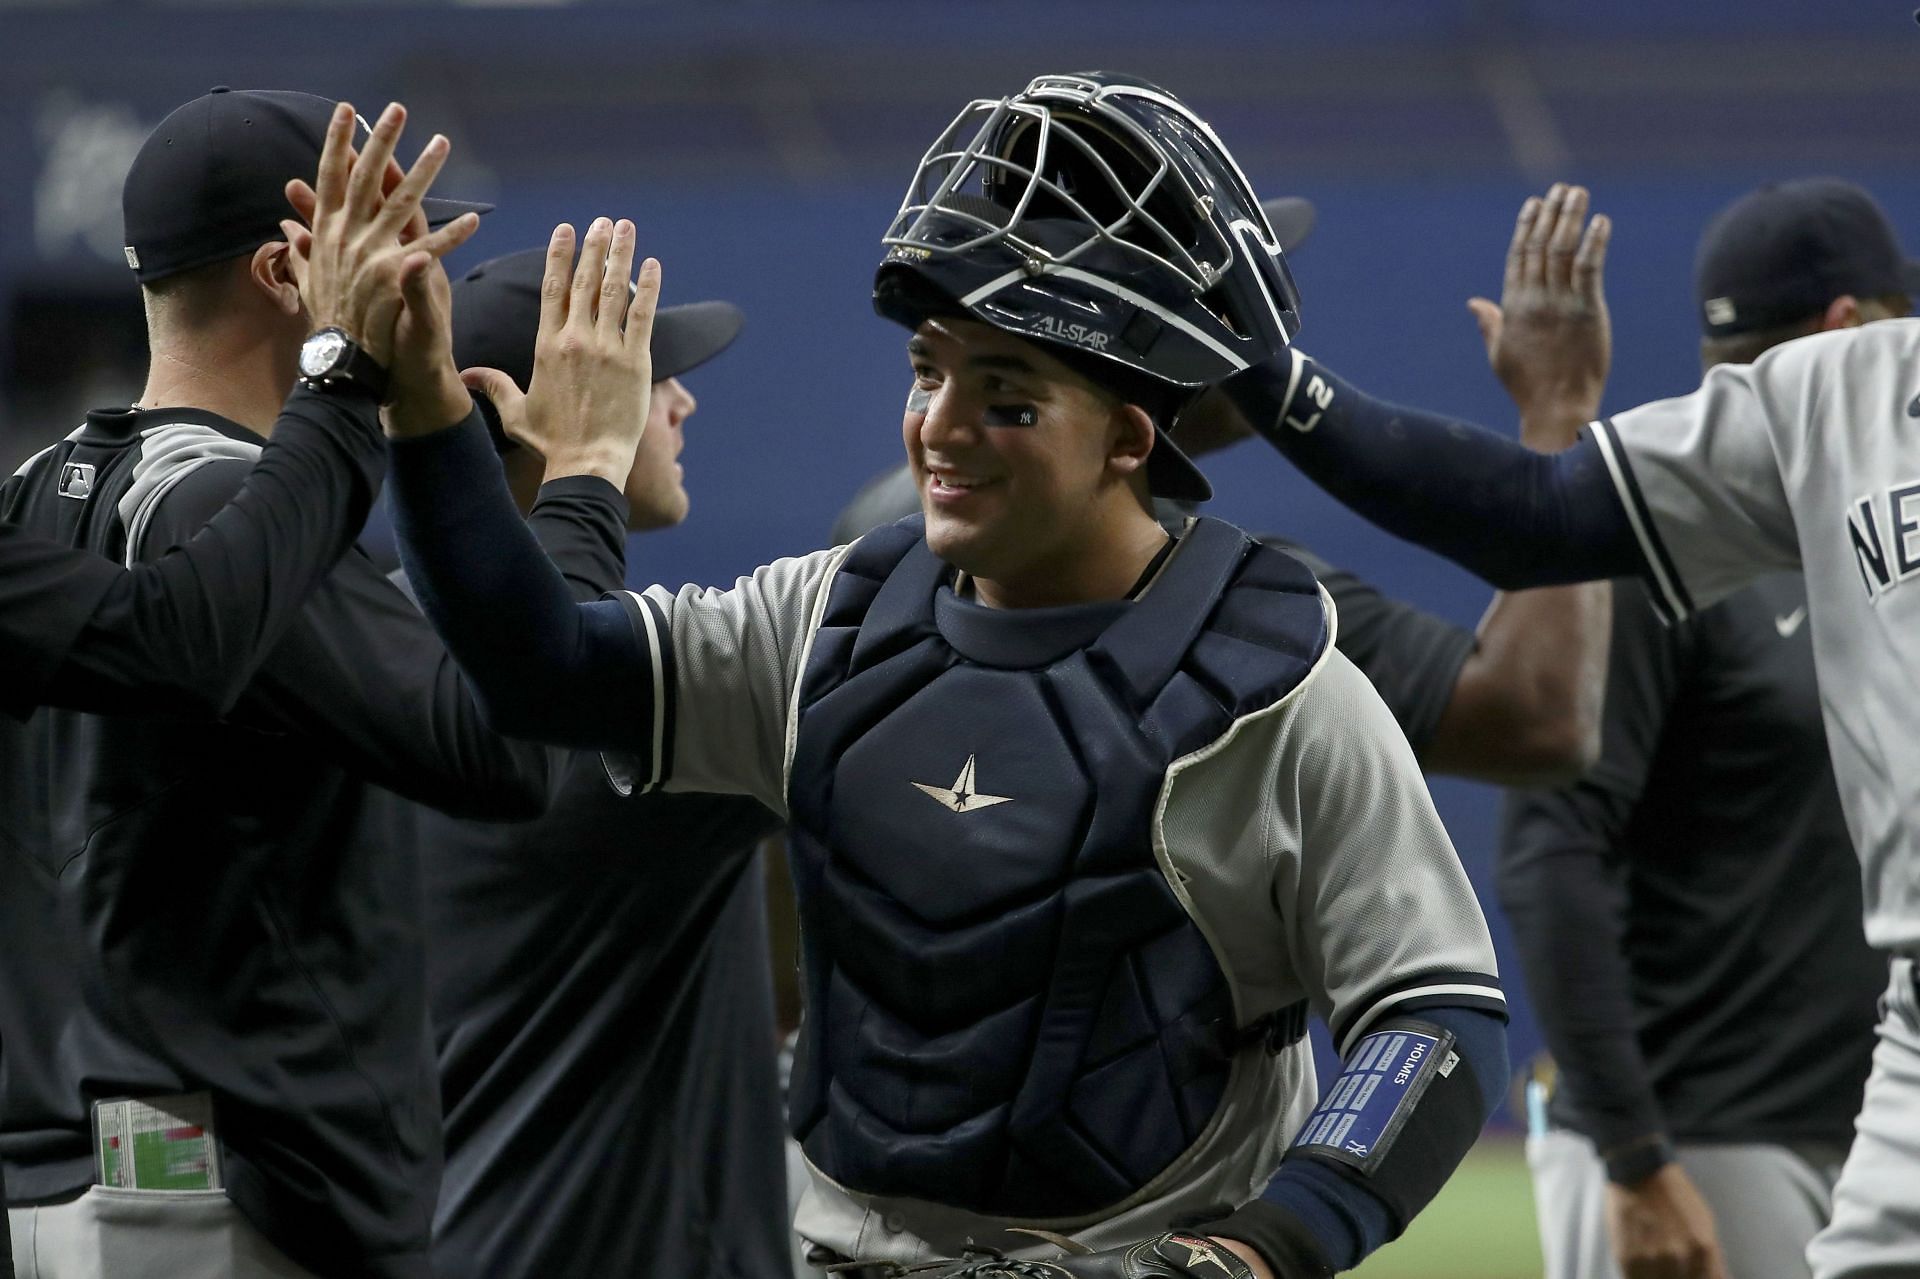 Yankees fans pay tribute to All-Star Jose Trevino after catcher becomes  first Yankee to win Platinum Glove